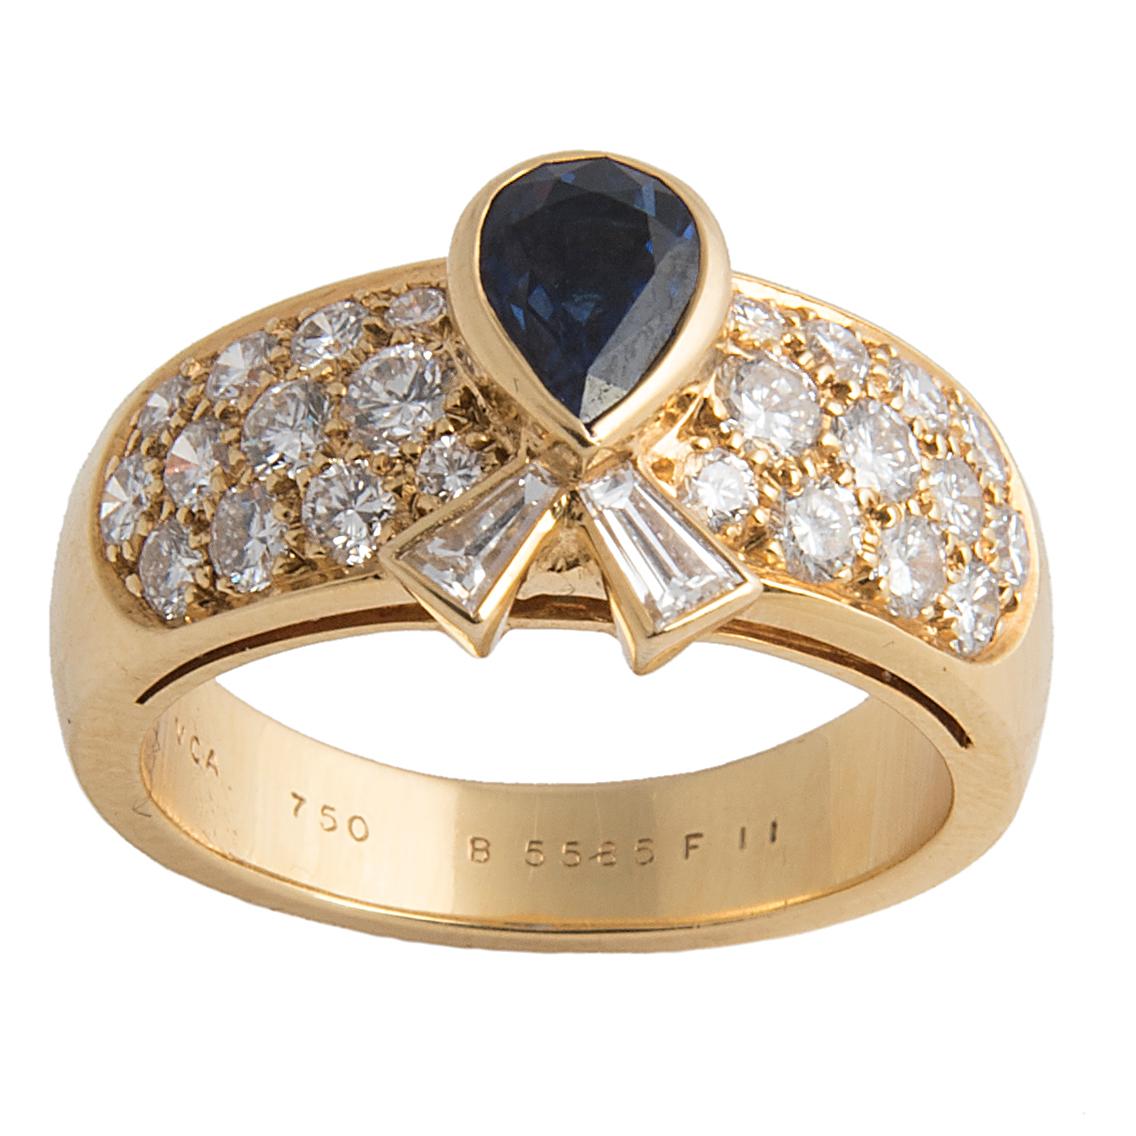 Elegant ring by Van Cleef & Arpels, pavé set diamonds centered by a pear-shaped blue sapphire and two tapered baguette diamonds representing a bow
Signed VCA, maker's mark, French hallmarks and numbered  B5585 F11
Size EU: 53, US 6 1/4
Ca 2000